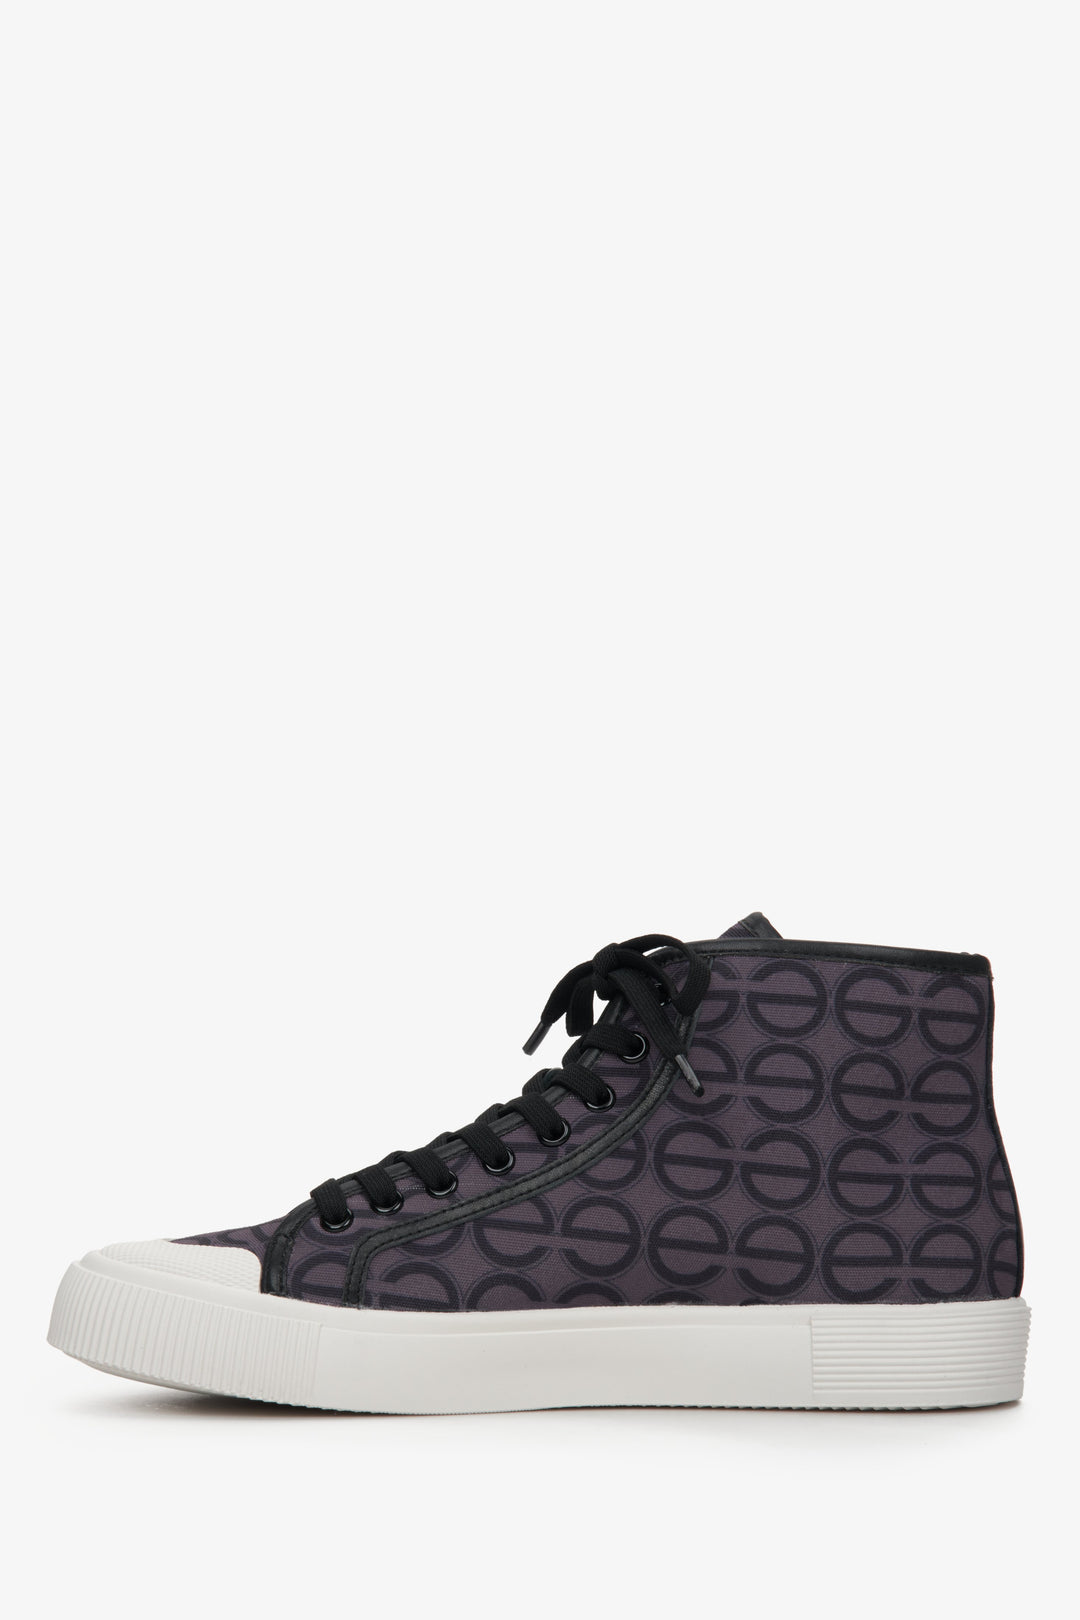 High-top textile women's sneakers in purple and black.